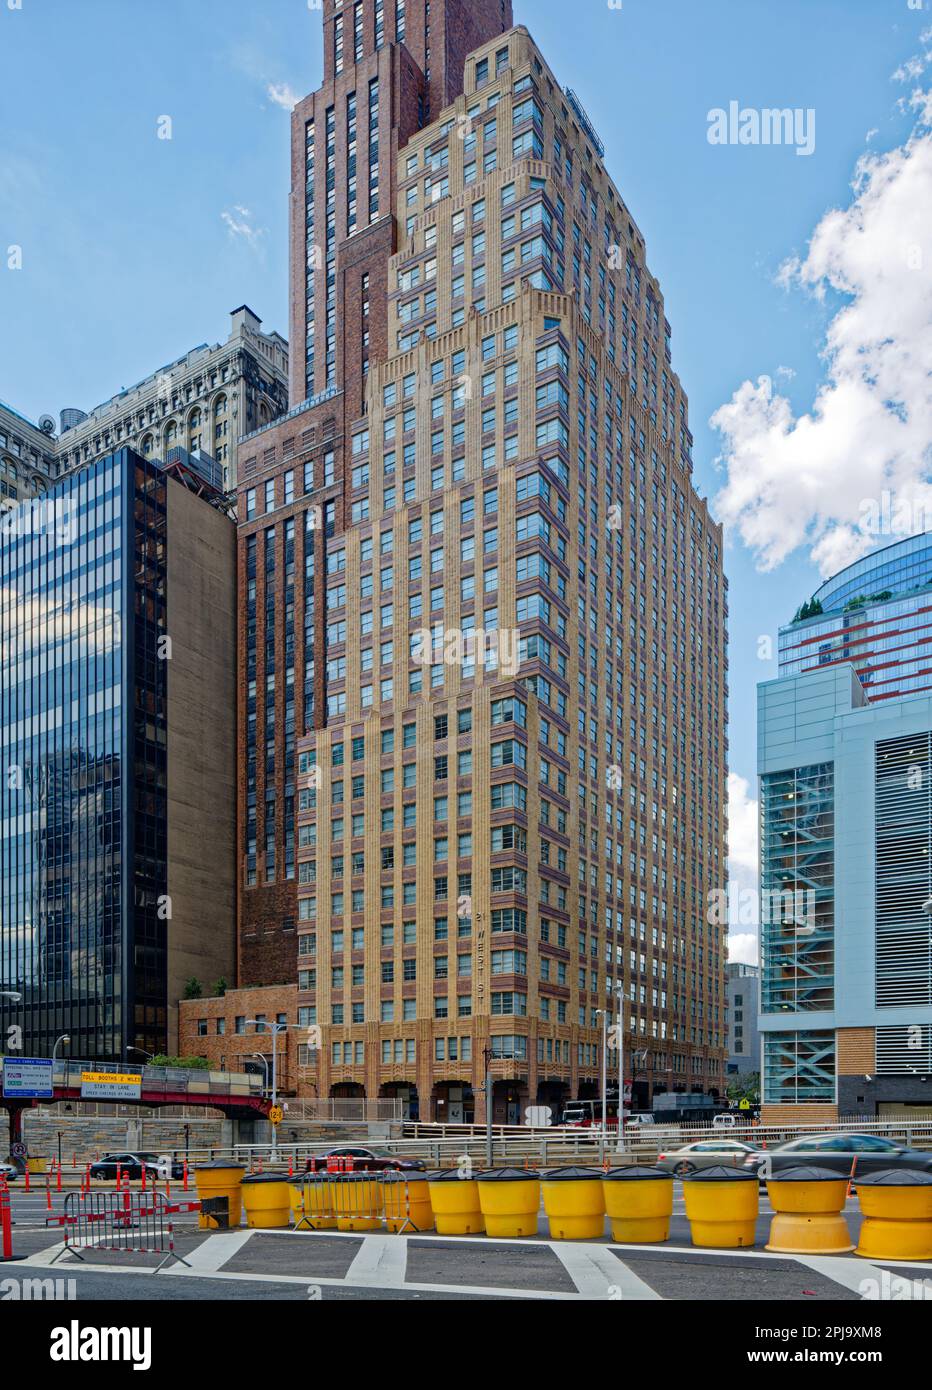 New York Athletic Club and Le Rivage Apartments, adjacent brick apartment towers, were designed by Starrett & Van Vleck for different purposes. Stock Photo